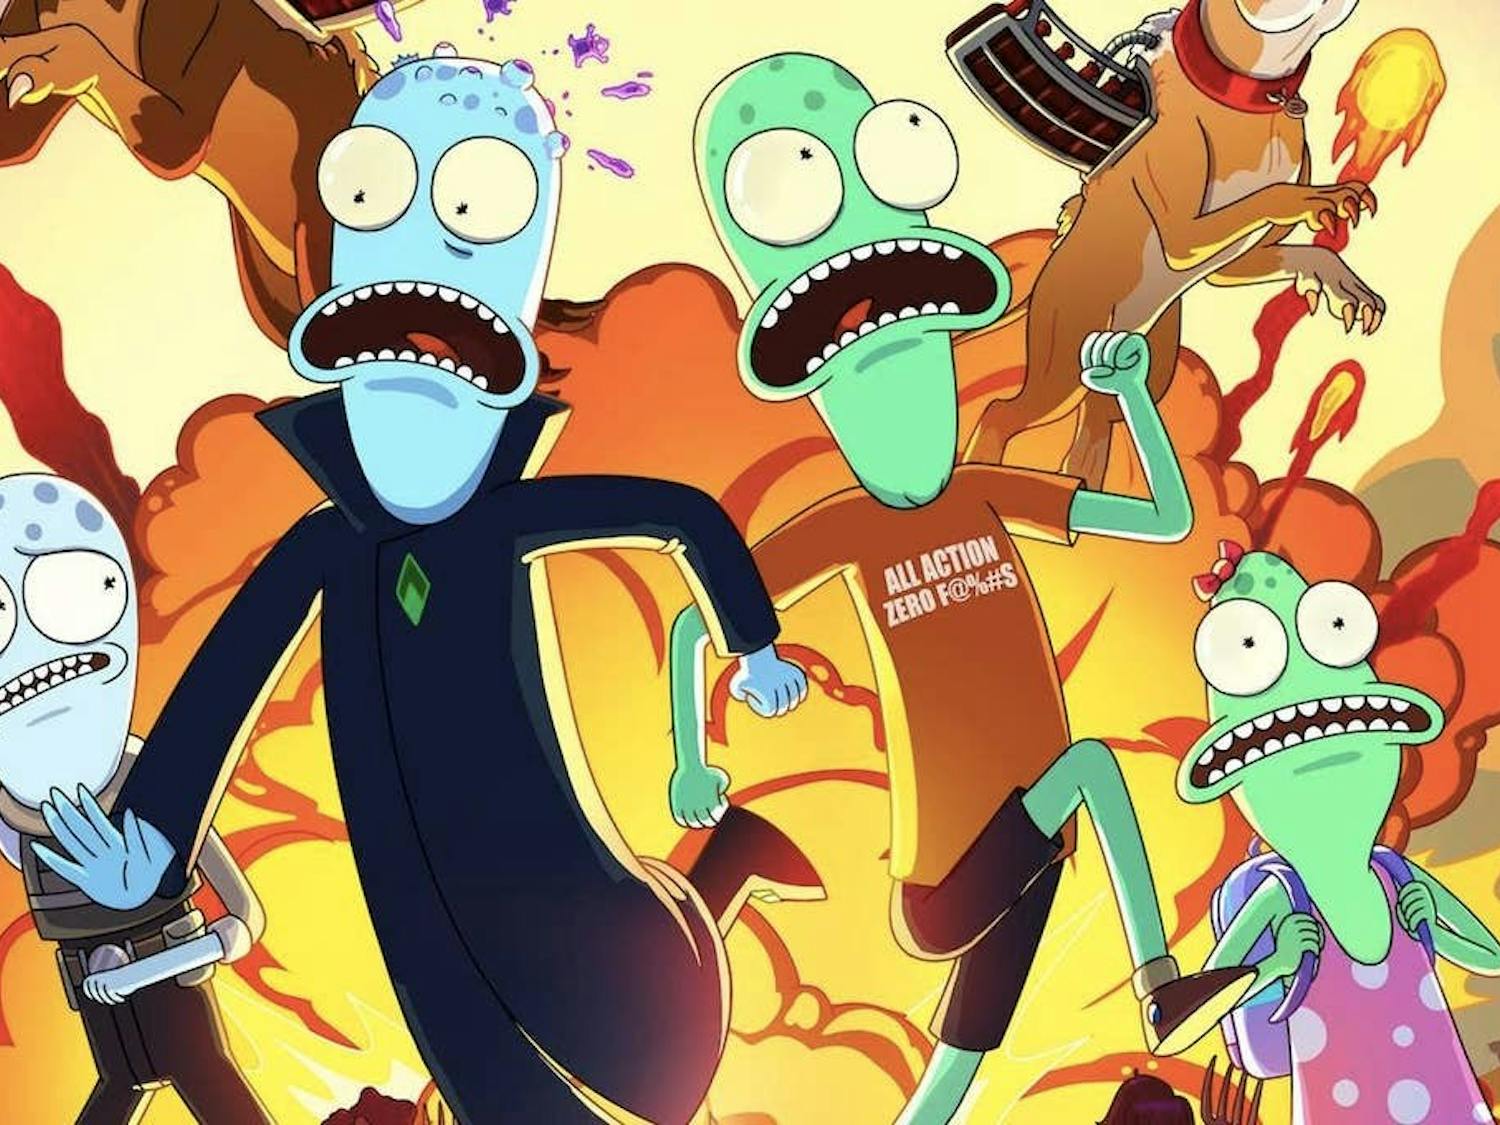 Don’t be fooled by the similar animation style or familiar voice actors; this show is not “just another” “Rick and Morty” clone.